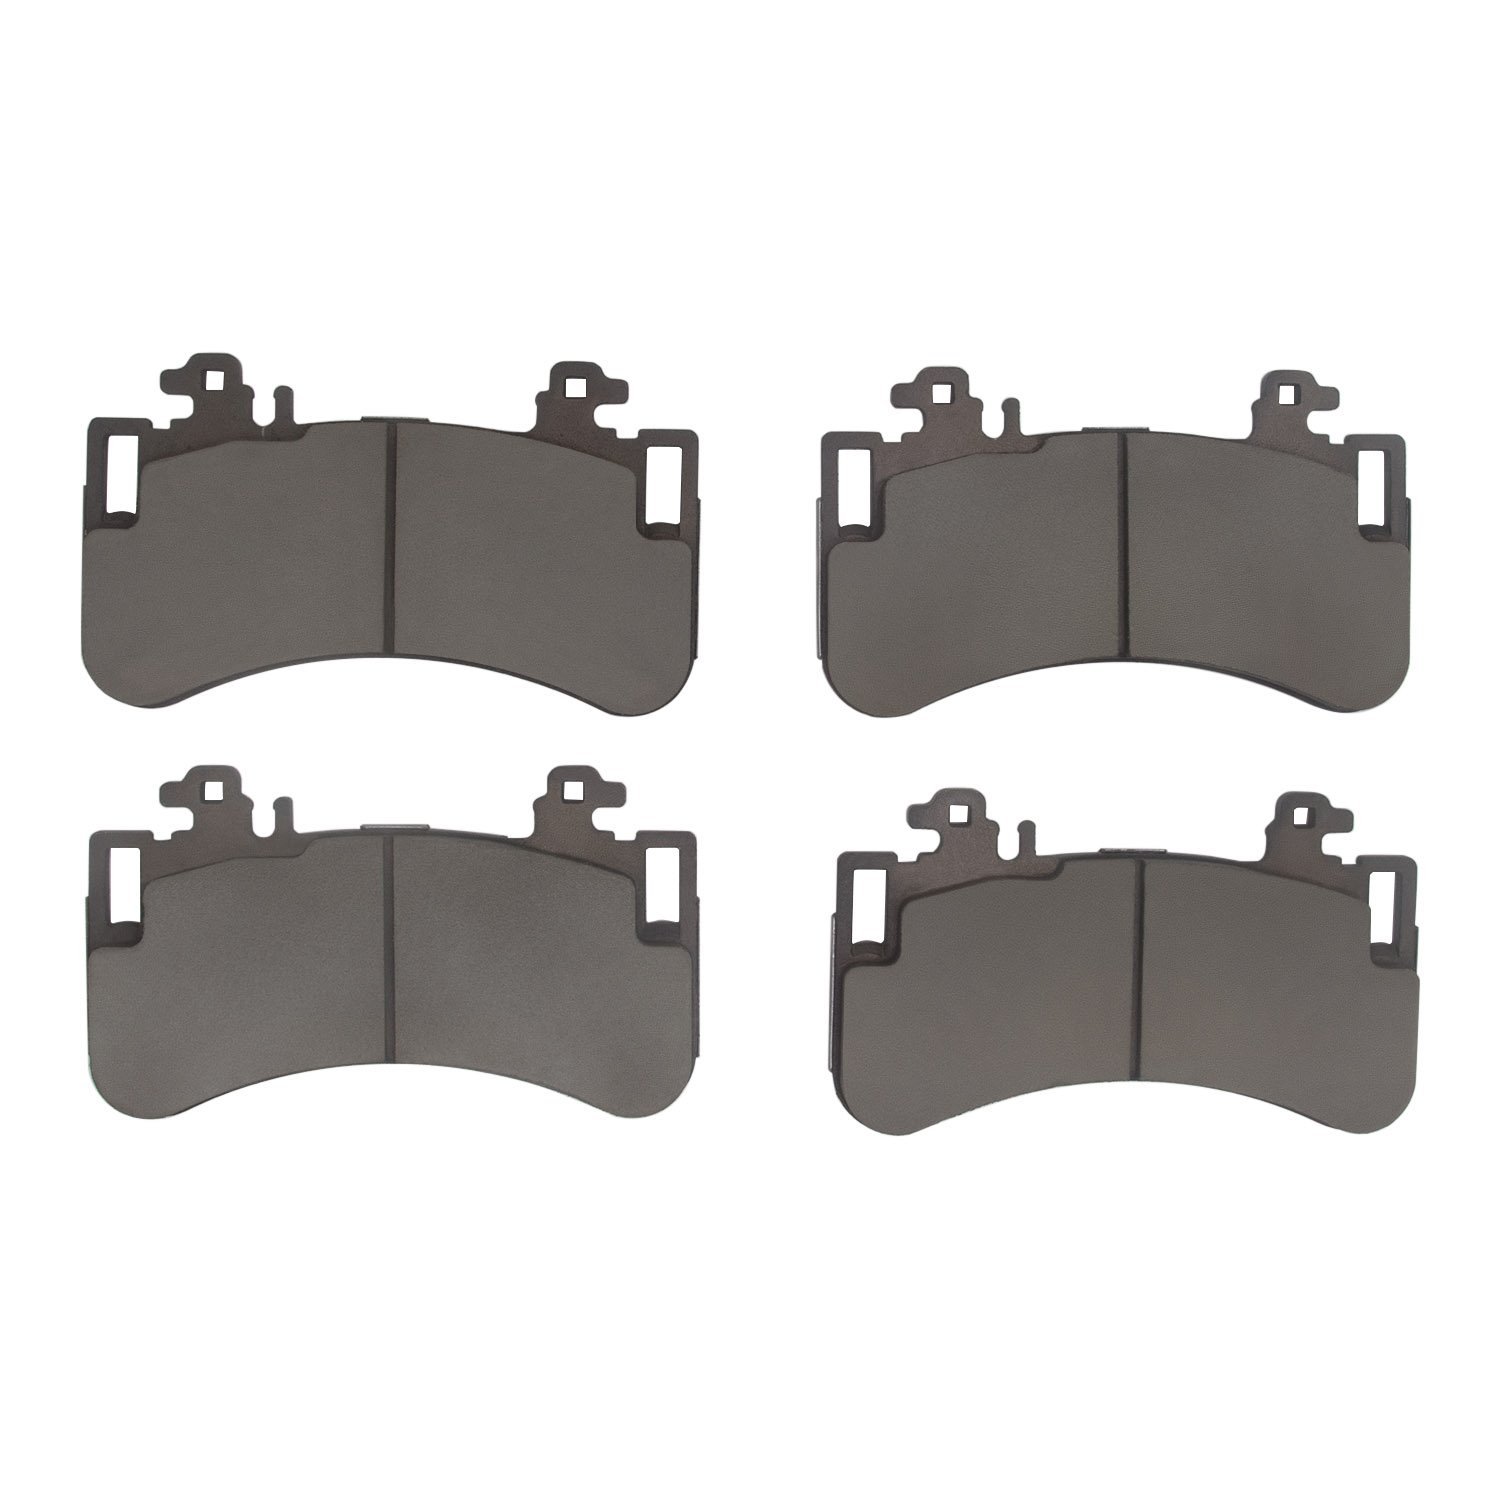 1551-2453-00 5000 Advanced Ceramic Brake Pads, Fits Select Mercedes-Benz, Position: Front